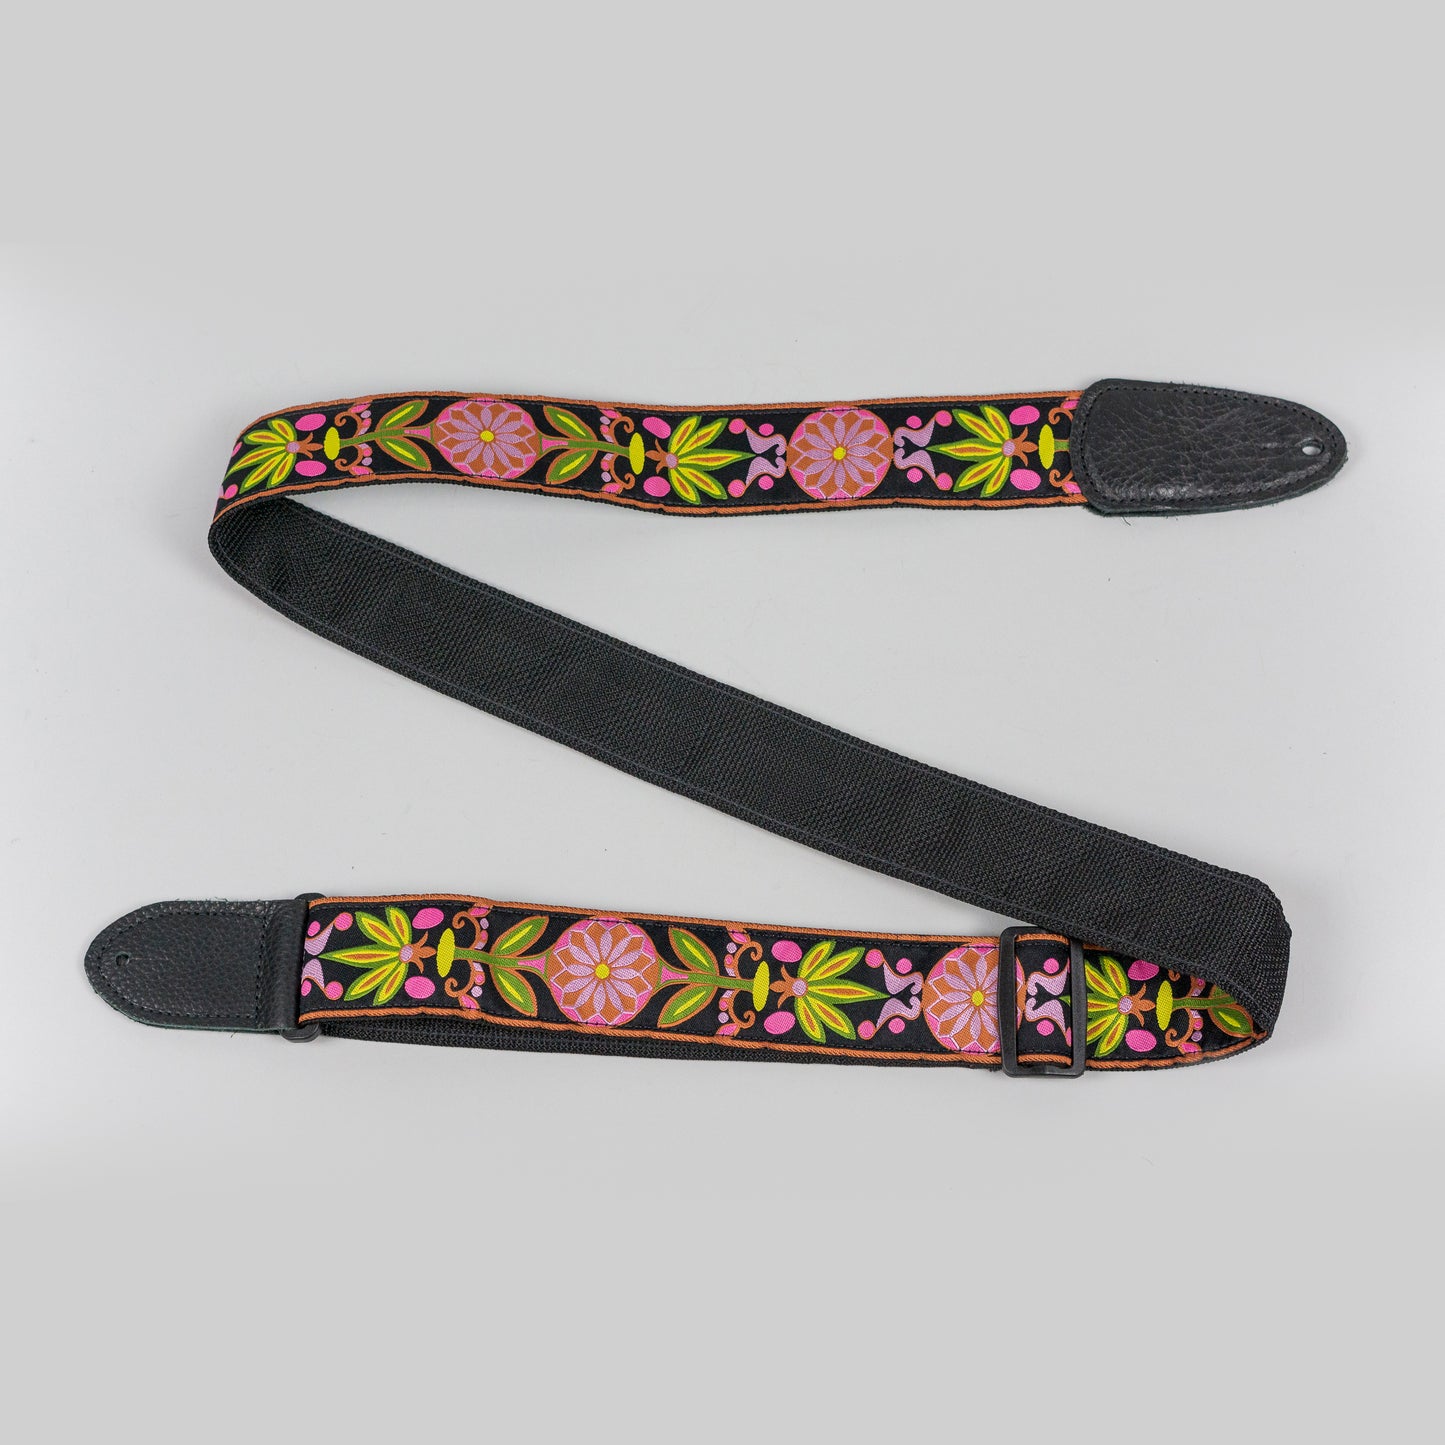 Henry Heller 2" Woven Jacquard Strap, Green and Pink Flowers